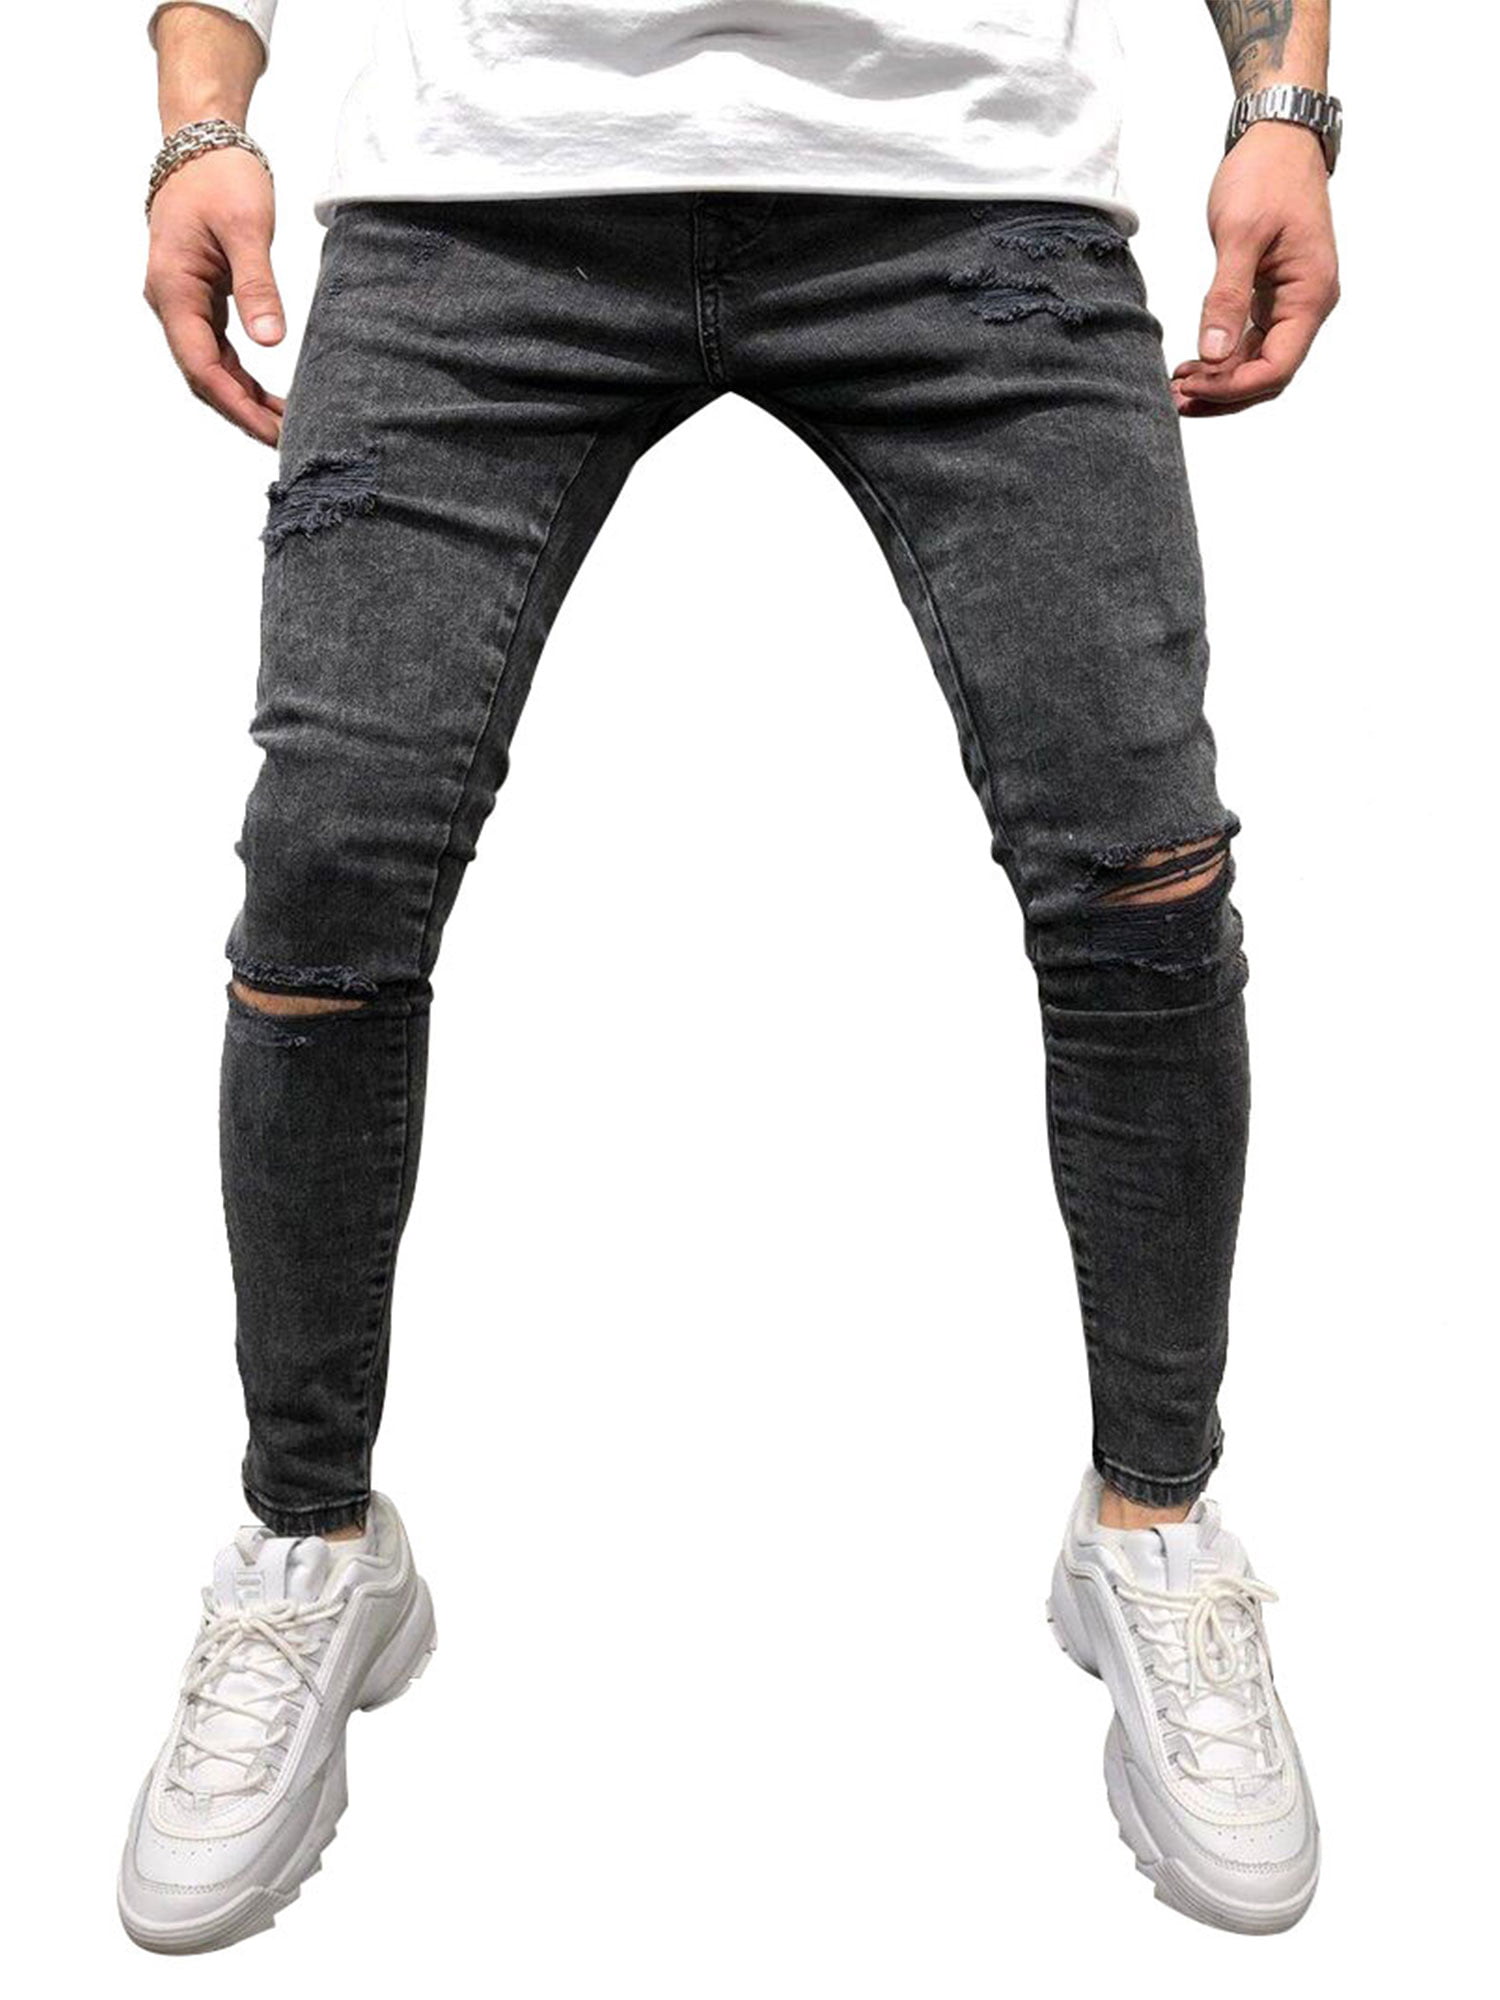 34,Navy Blue Men's Printed Jeans Street Wear Destroyed Distressed Stylish Slim Fit Denim Pants Casual Skinny Stretch Jean Trousers 